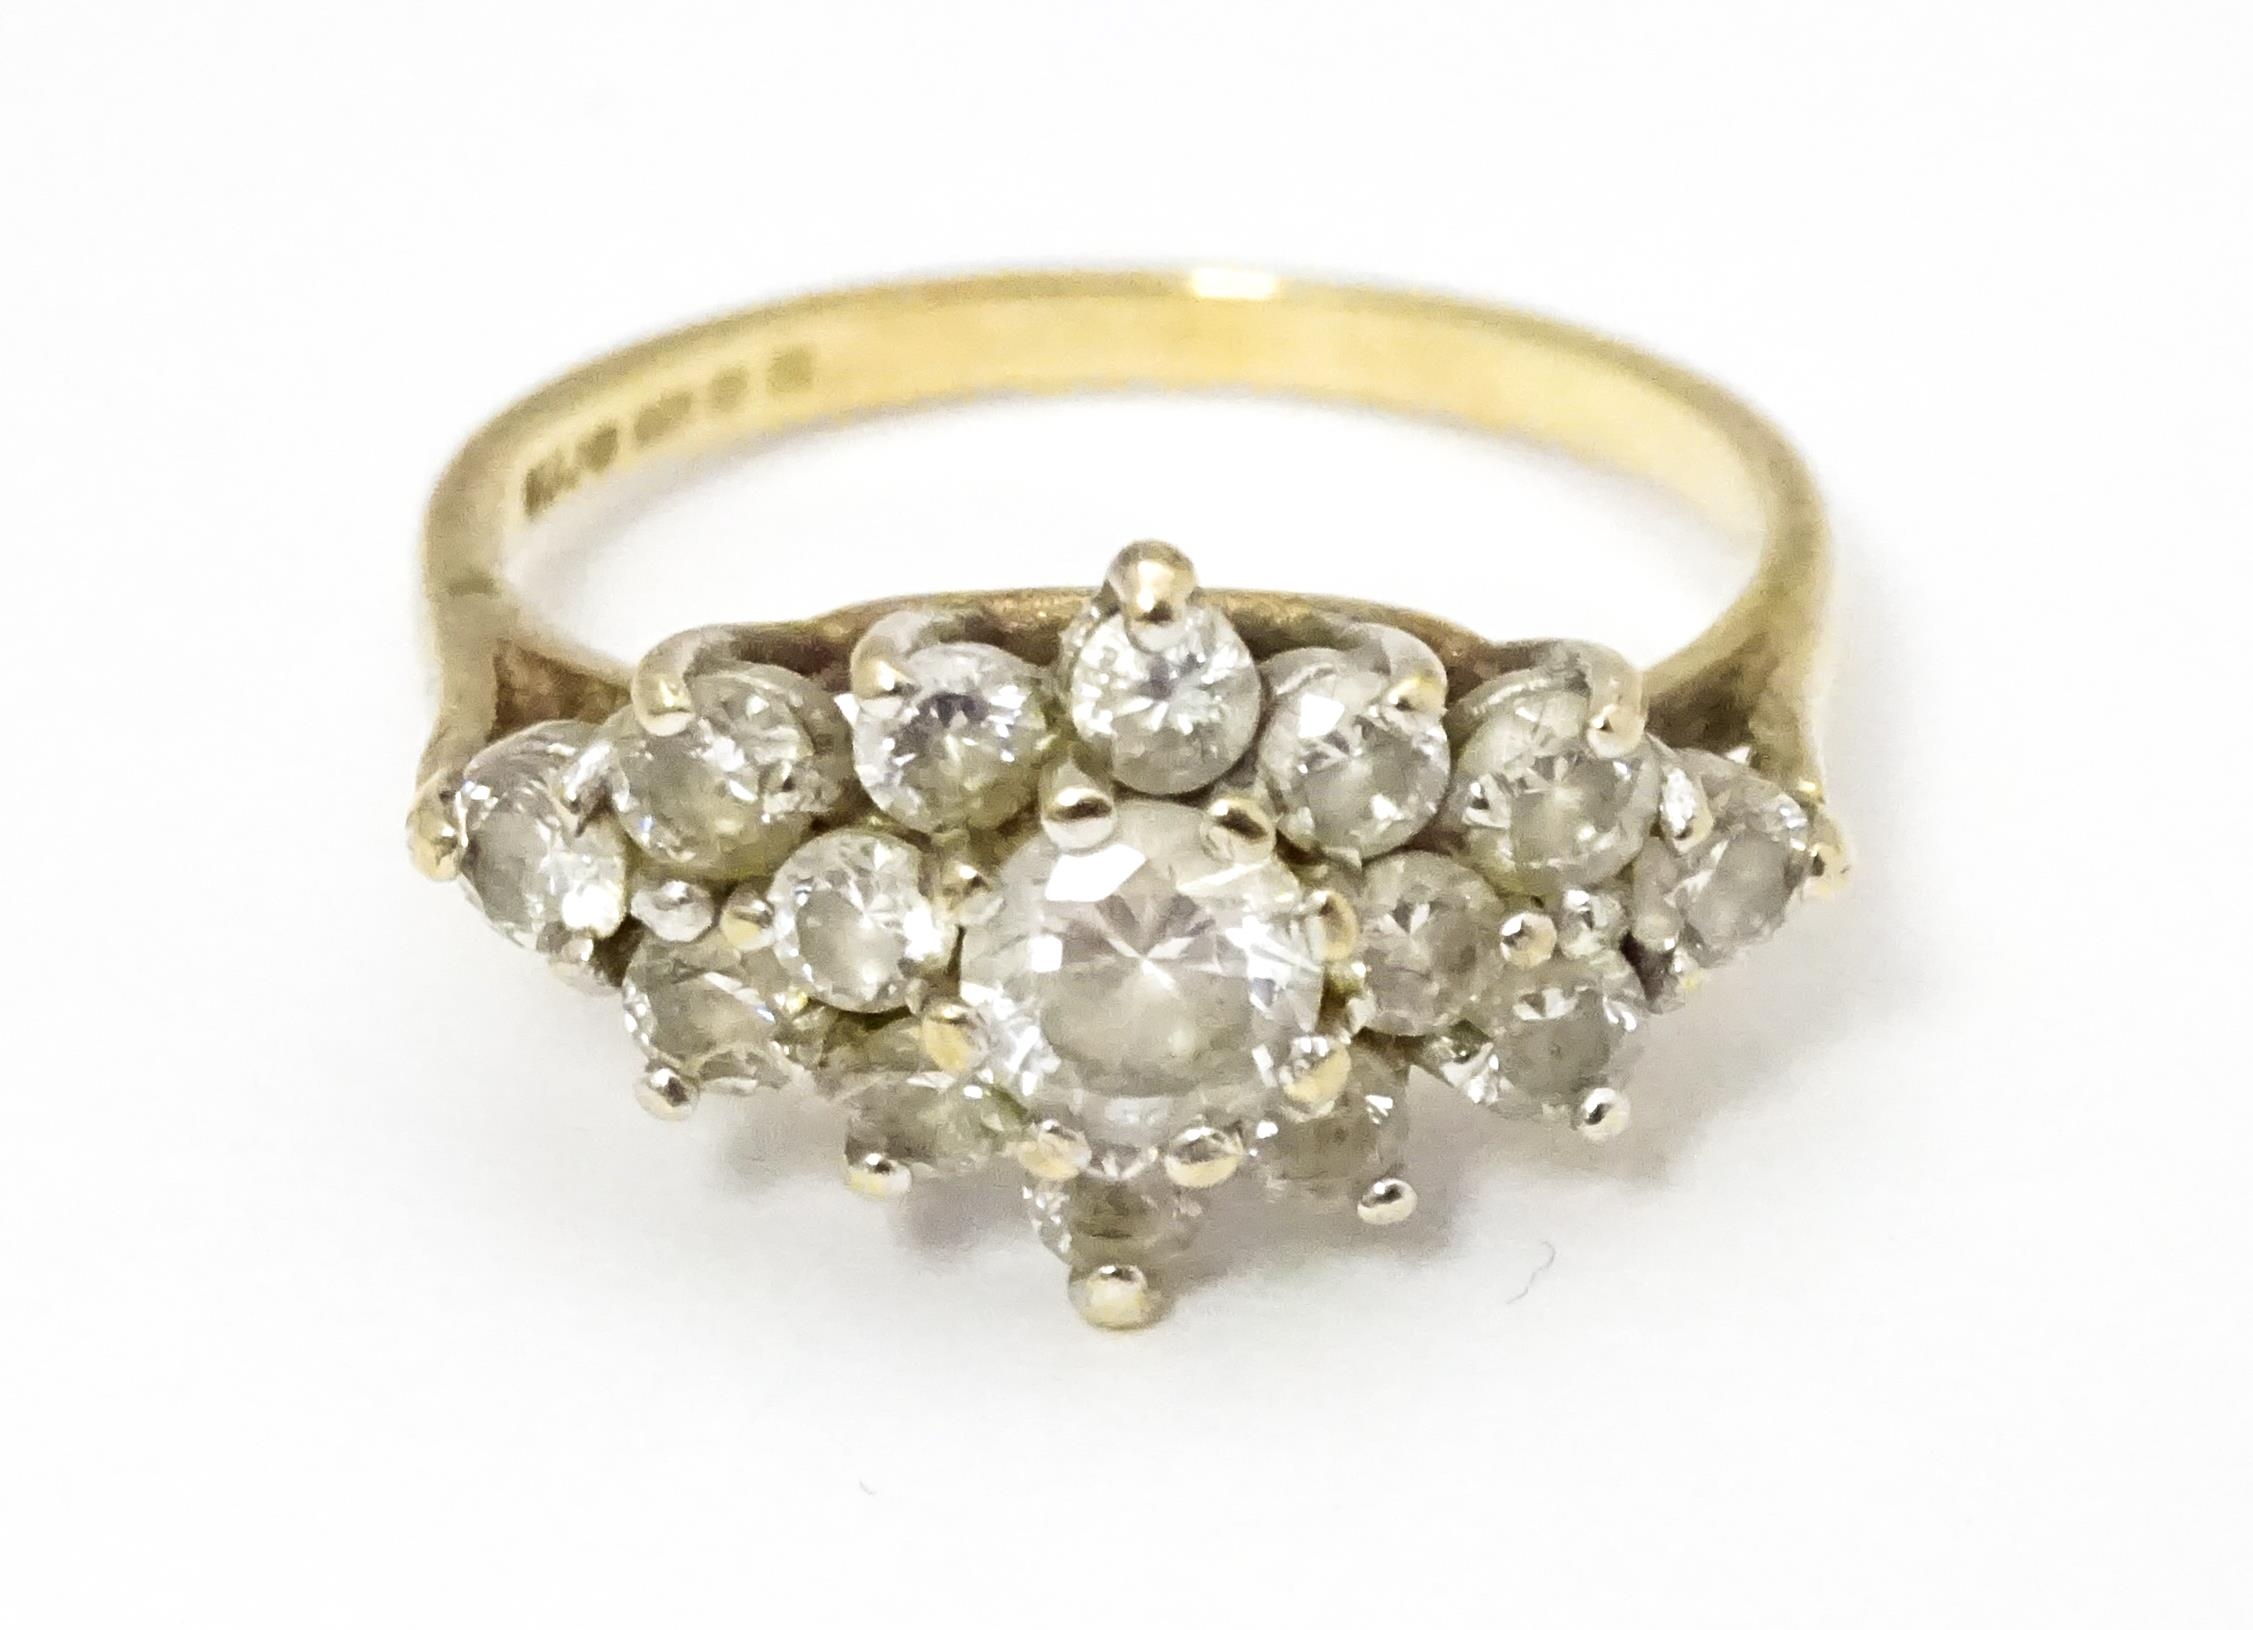 A 9ct gold ring set with cluster of white stones. Ring size approx. J 1/2 Please Note - we do not